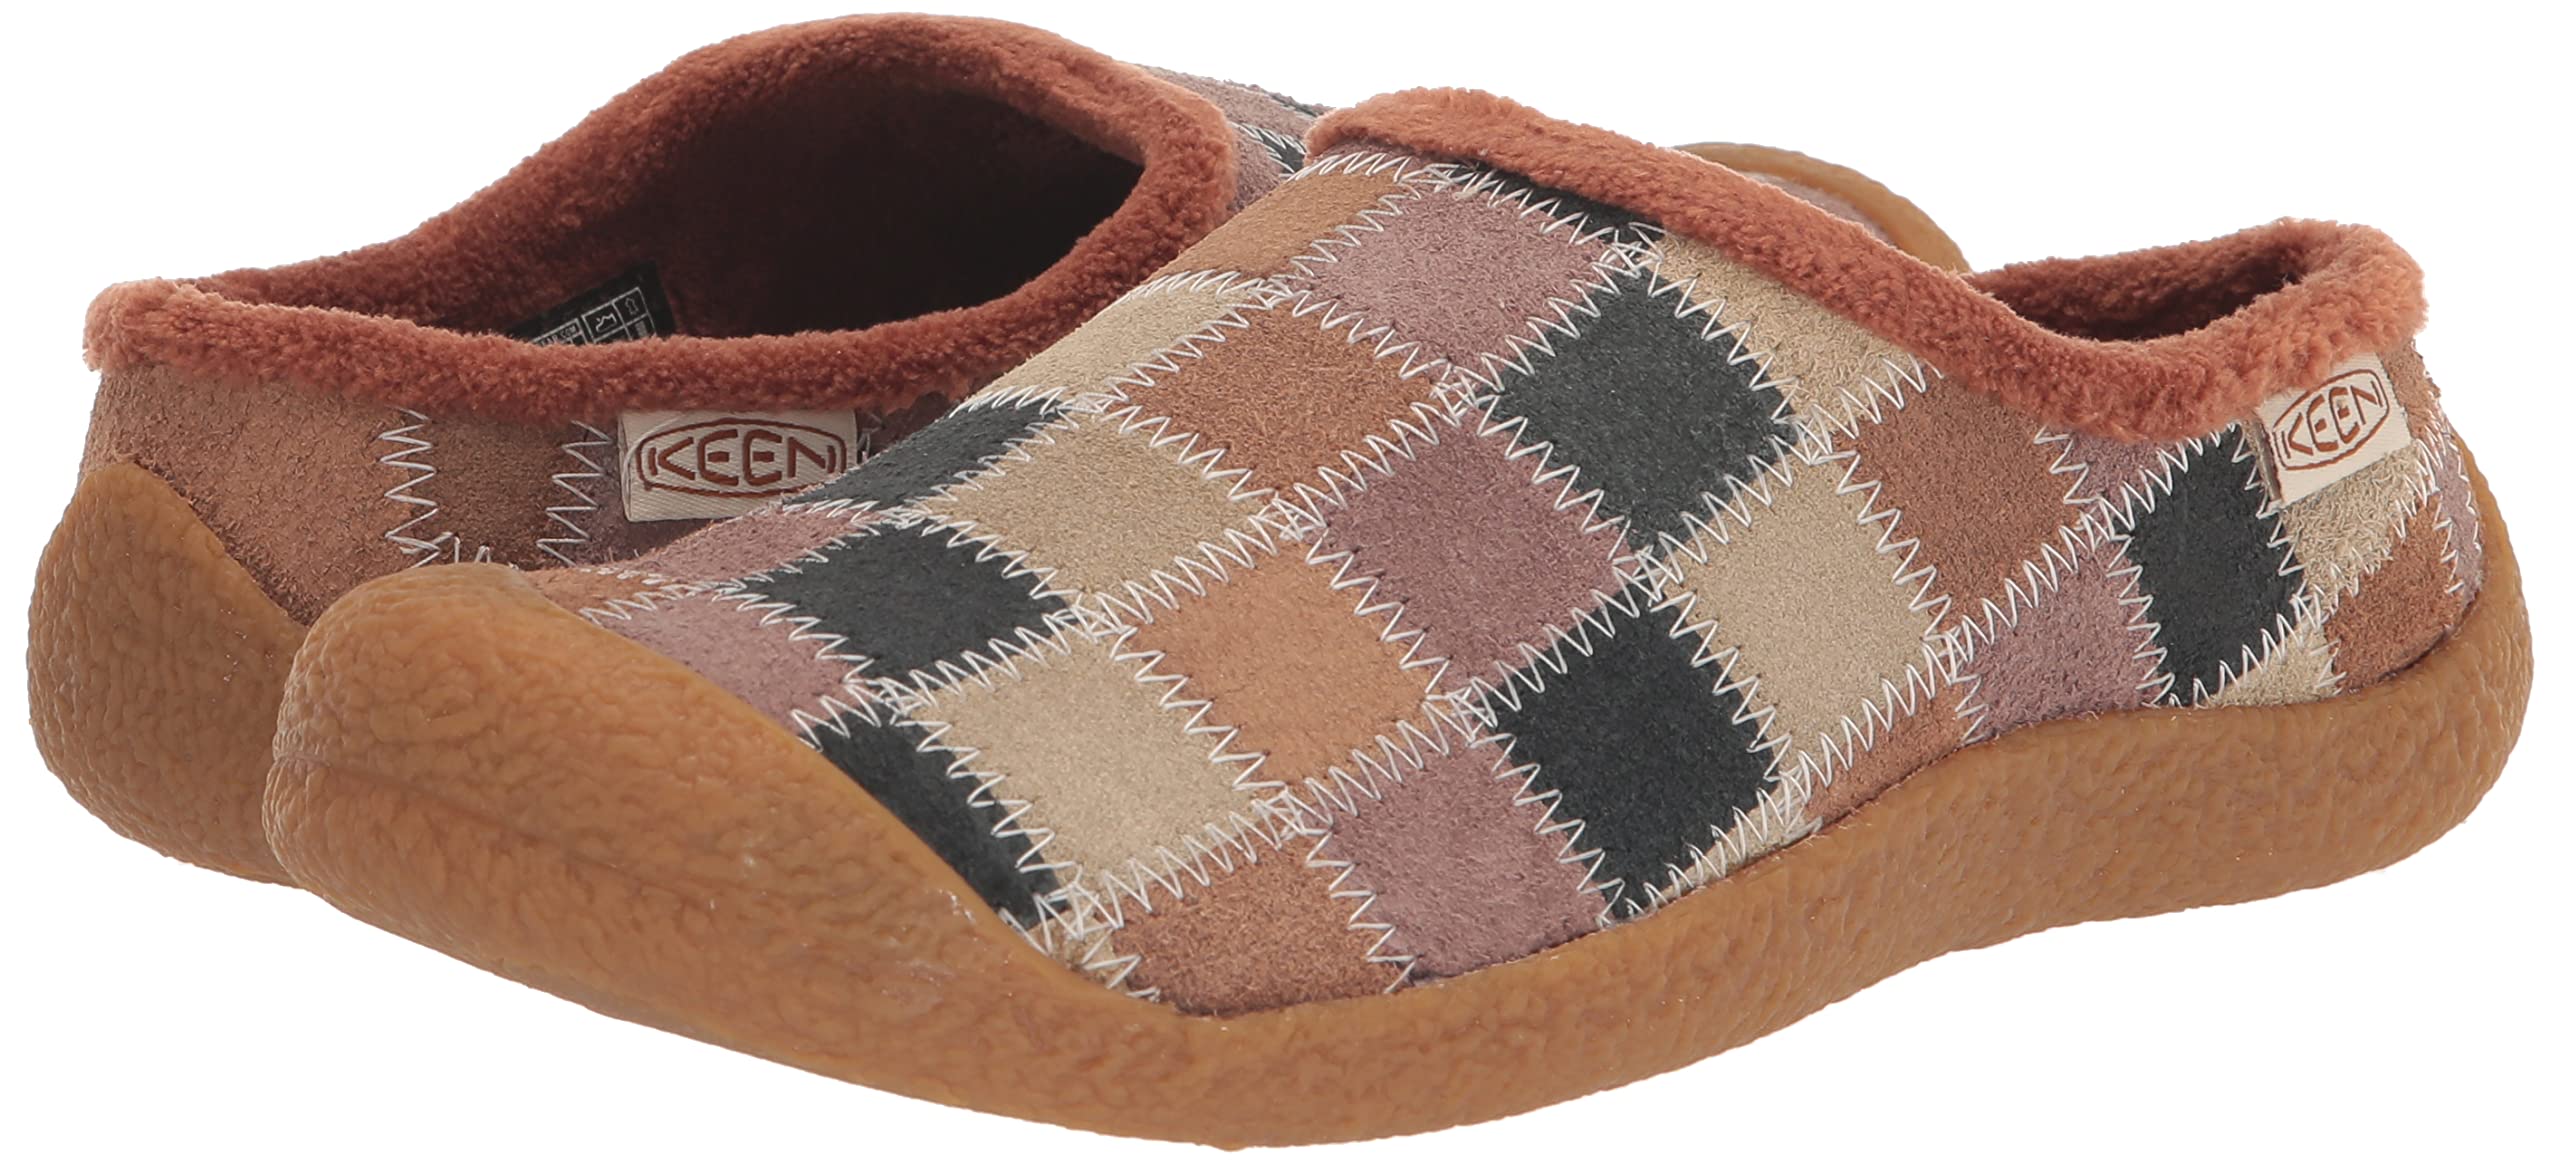 KEEN Women's Howser Harvest Casual Comfortable Leather Slip on Mule